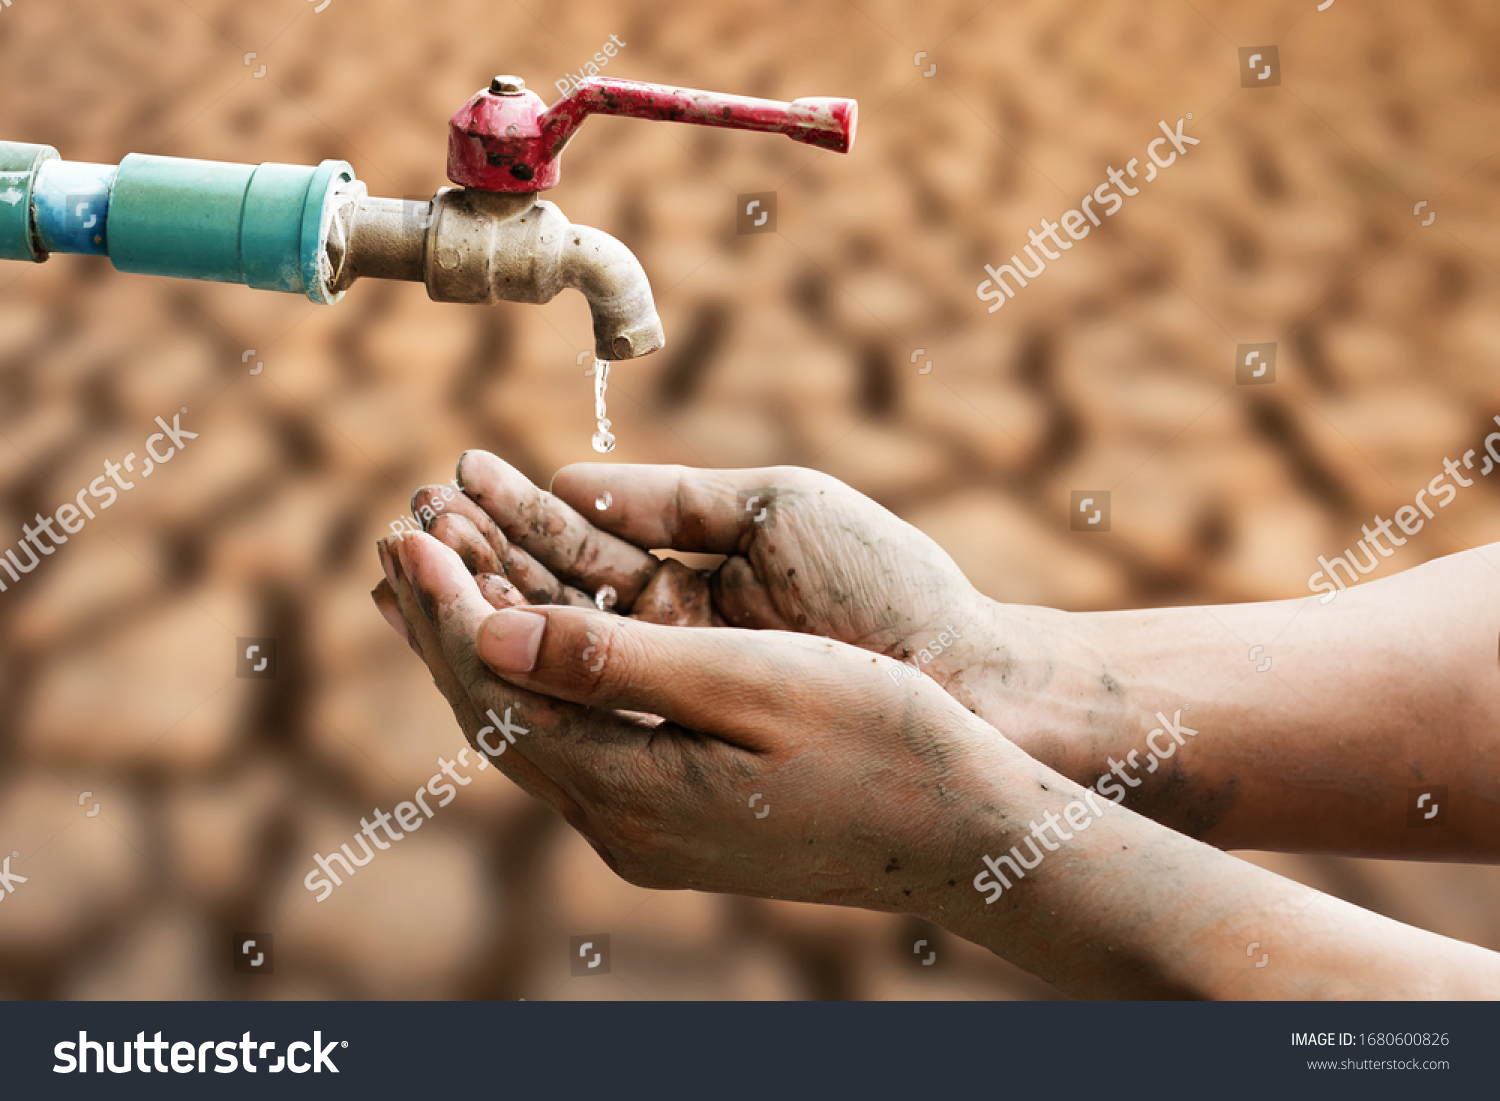 Hand of people wating for a drip of water from a faucet at desert. Climate change, water scarcity and crisis concept. #1680600826